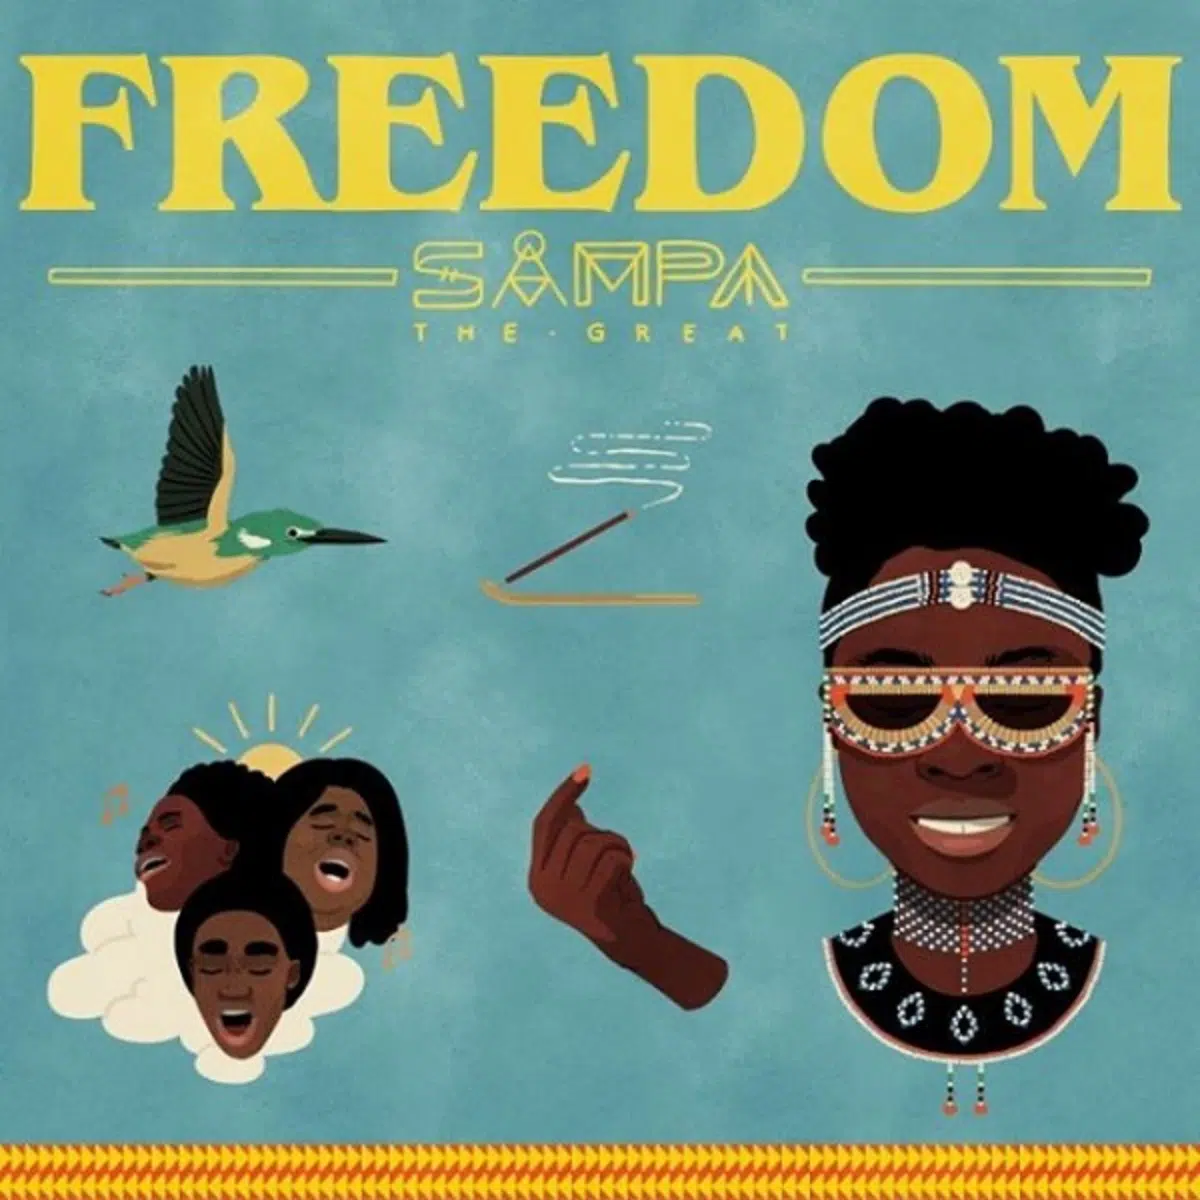 DOWNLOAD: Sampa The Great – “Freedom” Mp3